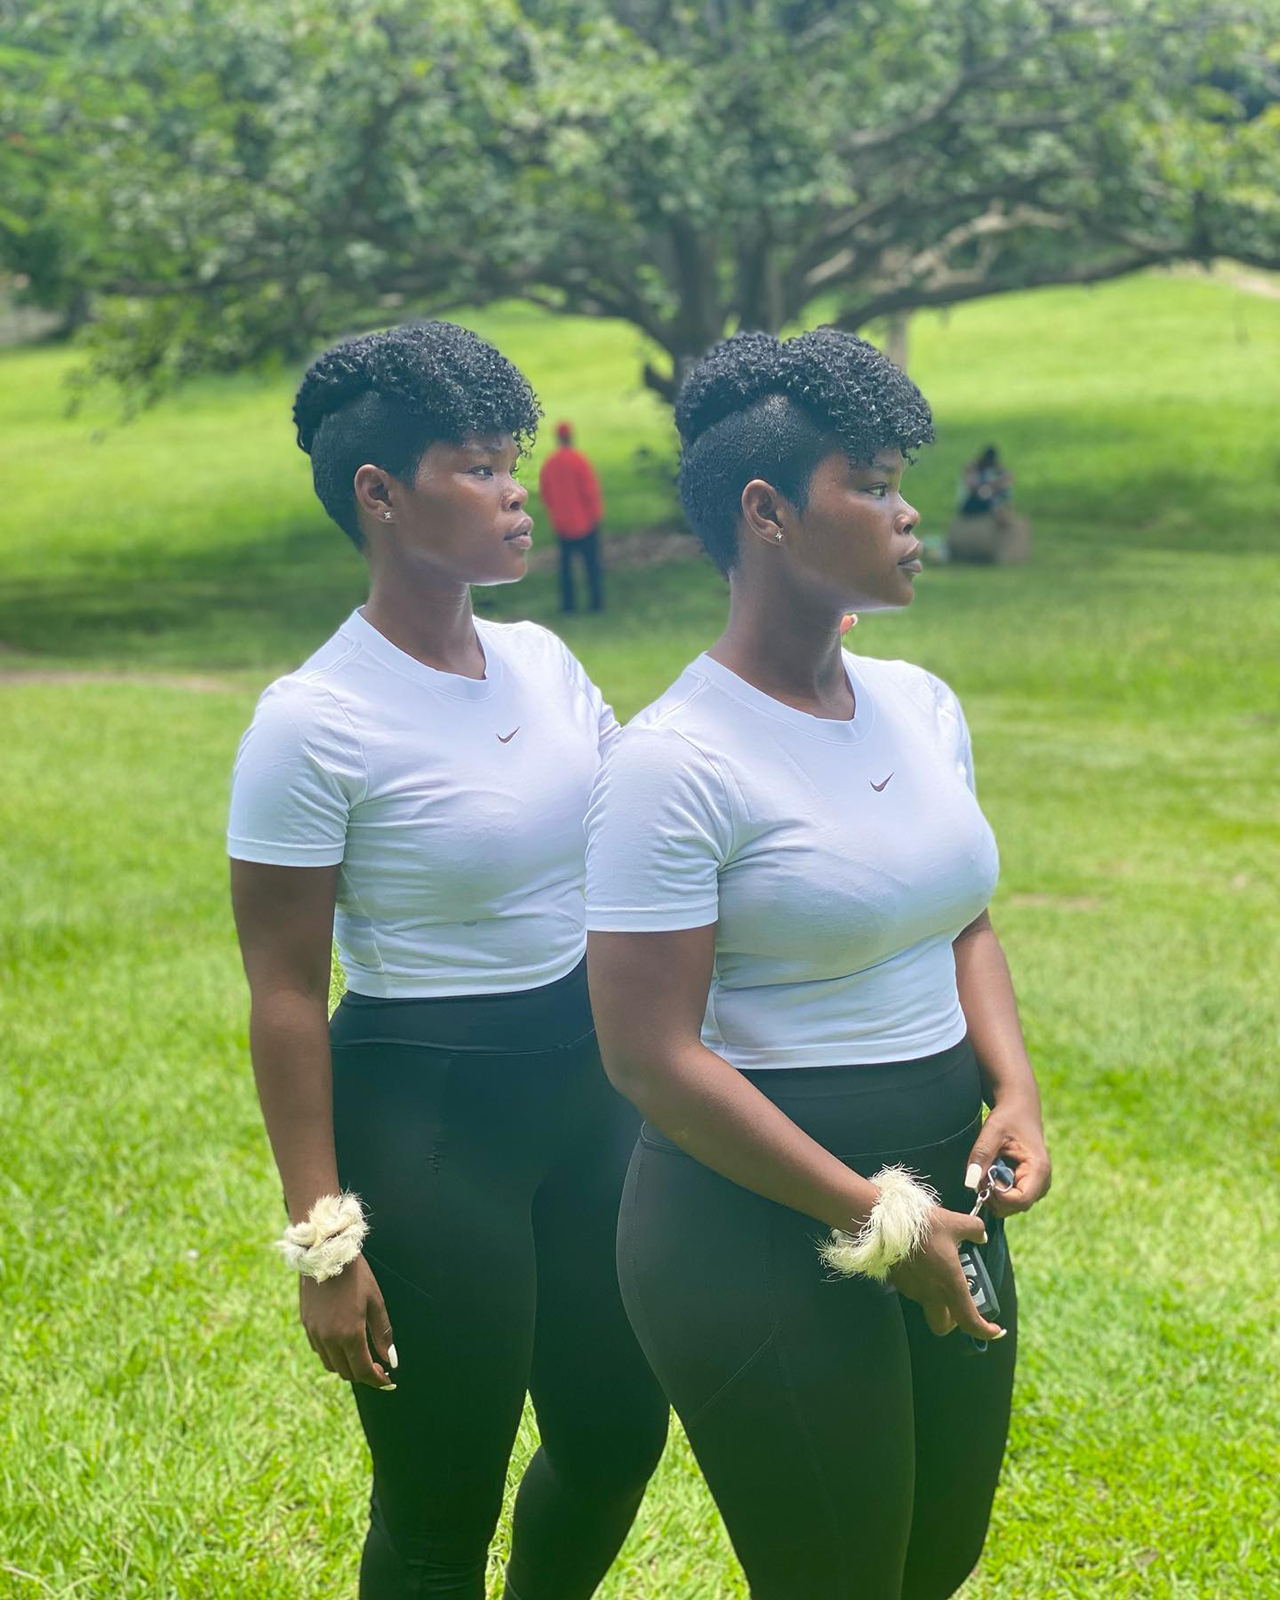 Qwabe twins' recent post in new hairstyle and no makeup, leaving fans astonished 1